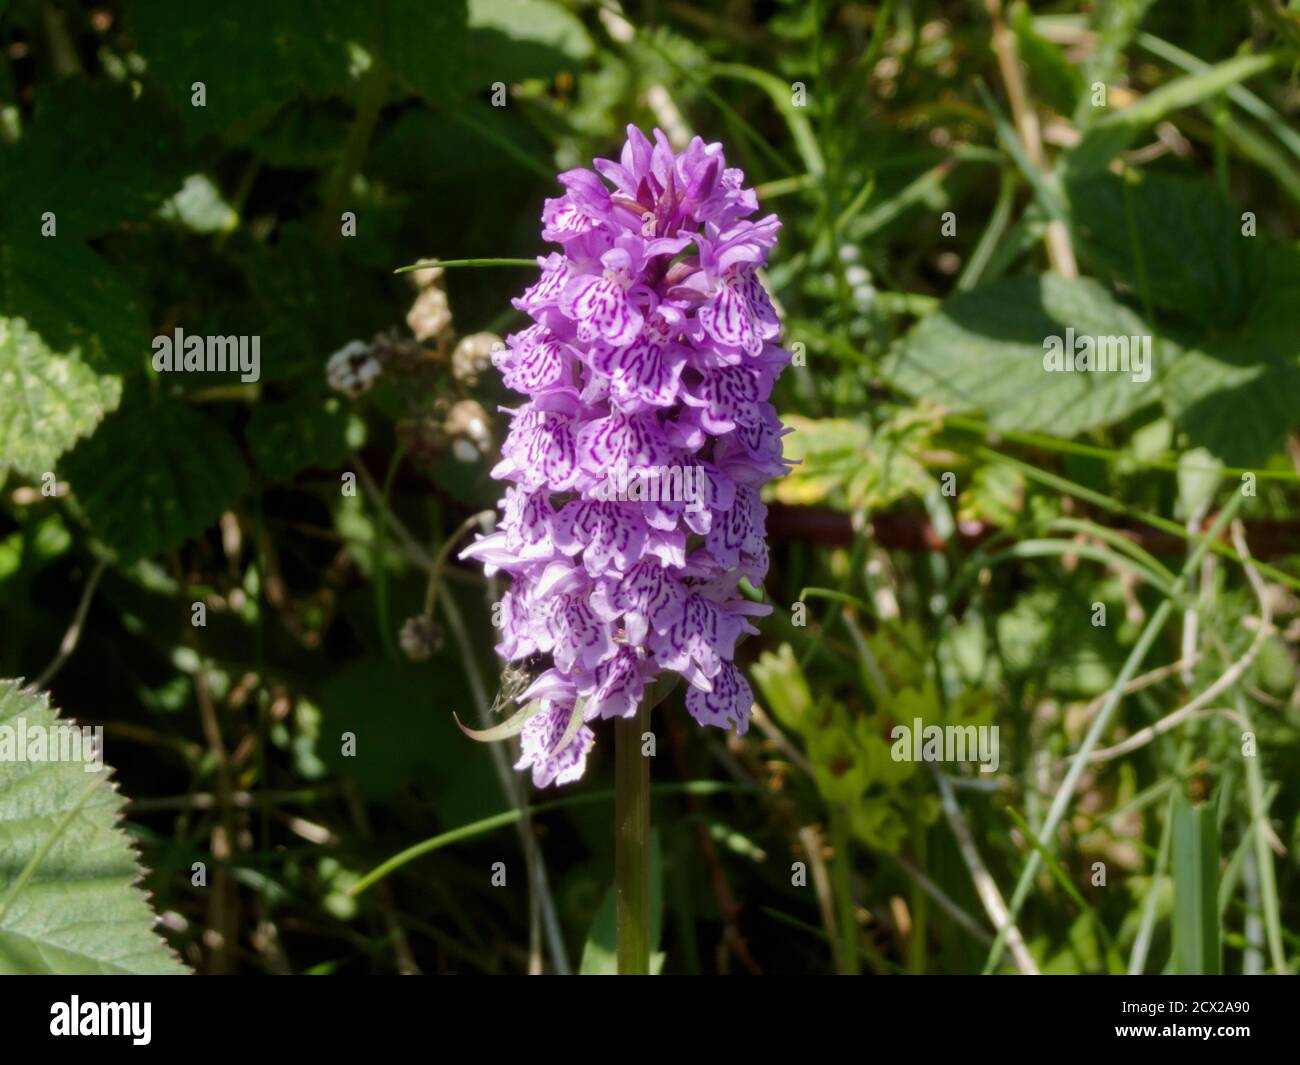 Common Spotted Orchid Plant ( Dactylorhiza fuchsii ) In Flower, UK Stock Photo